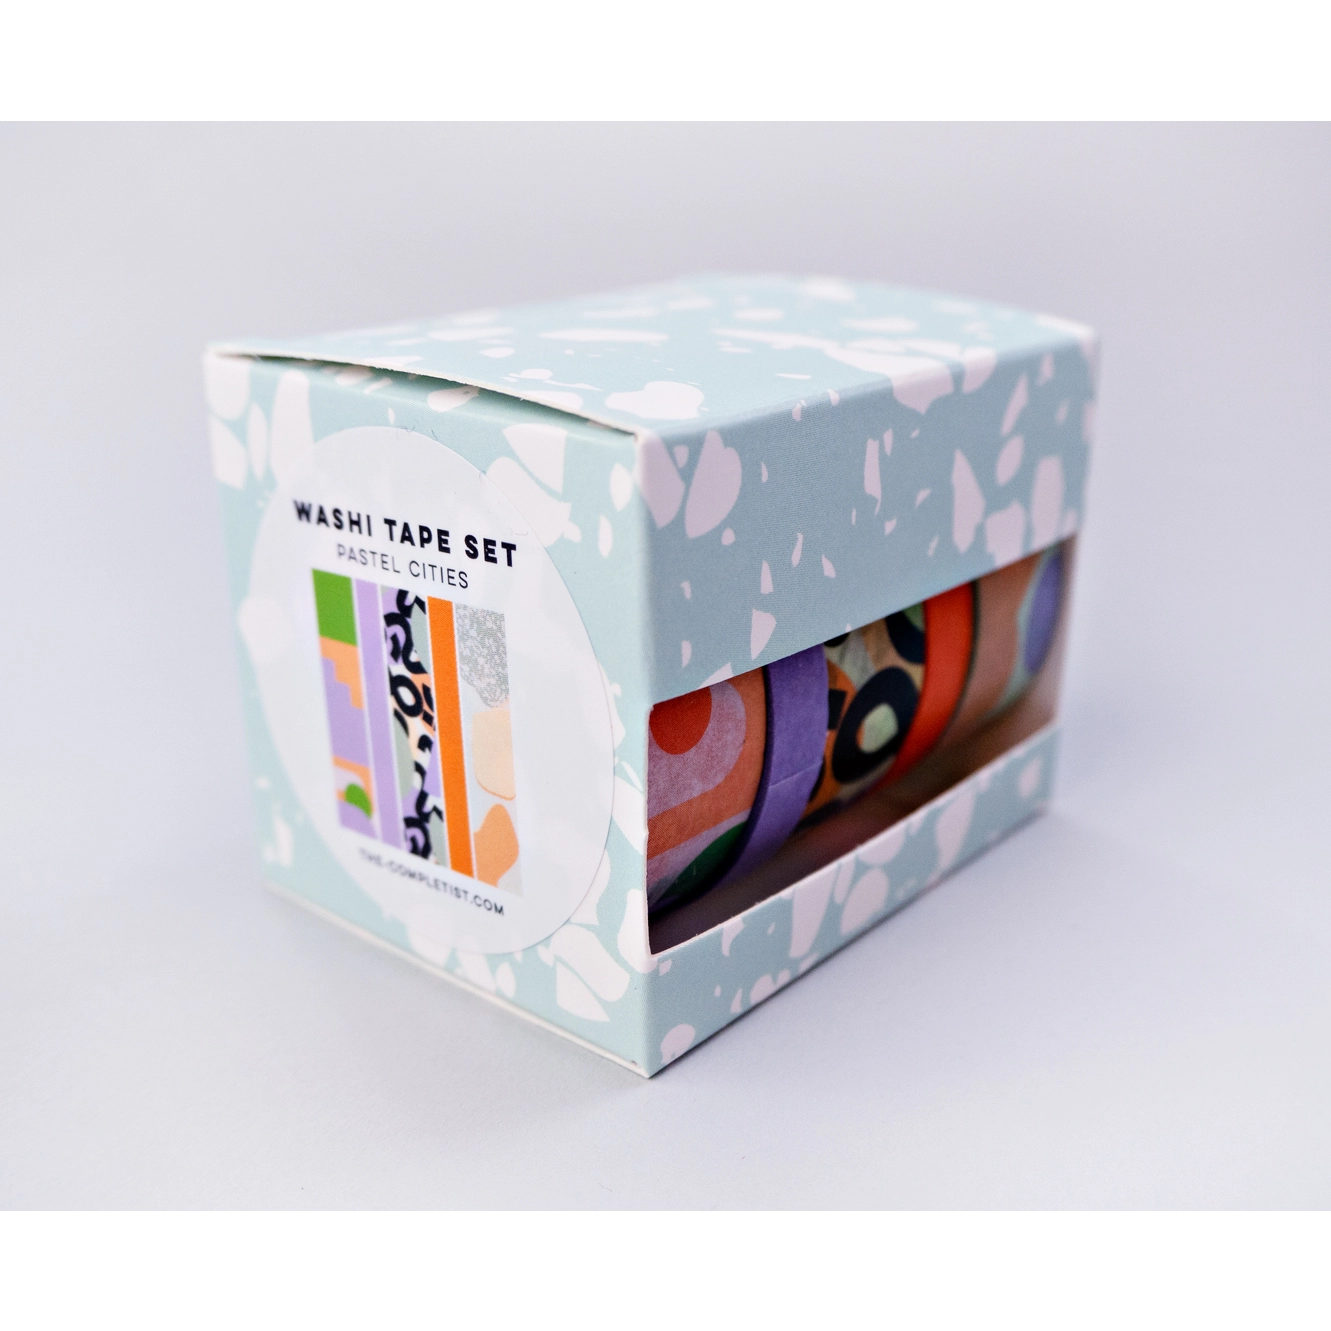 The Completist - Pastell Cities Washi Tape Set 3